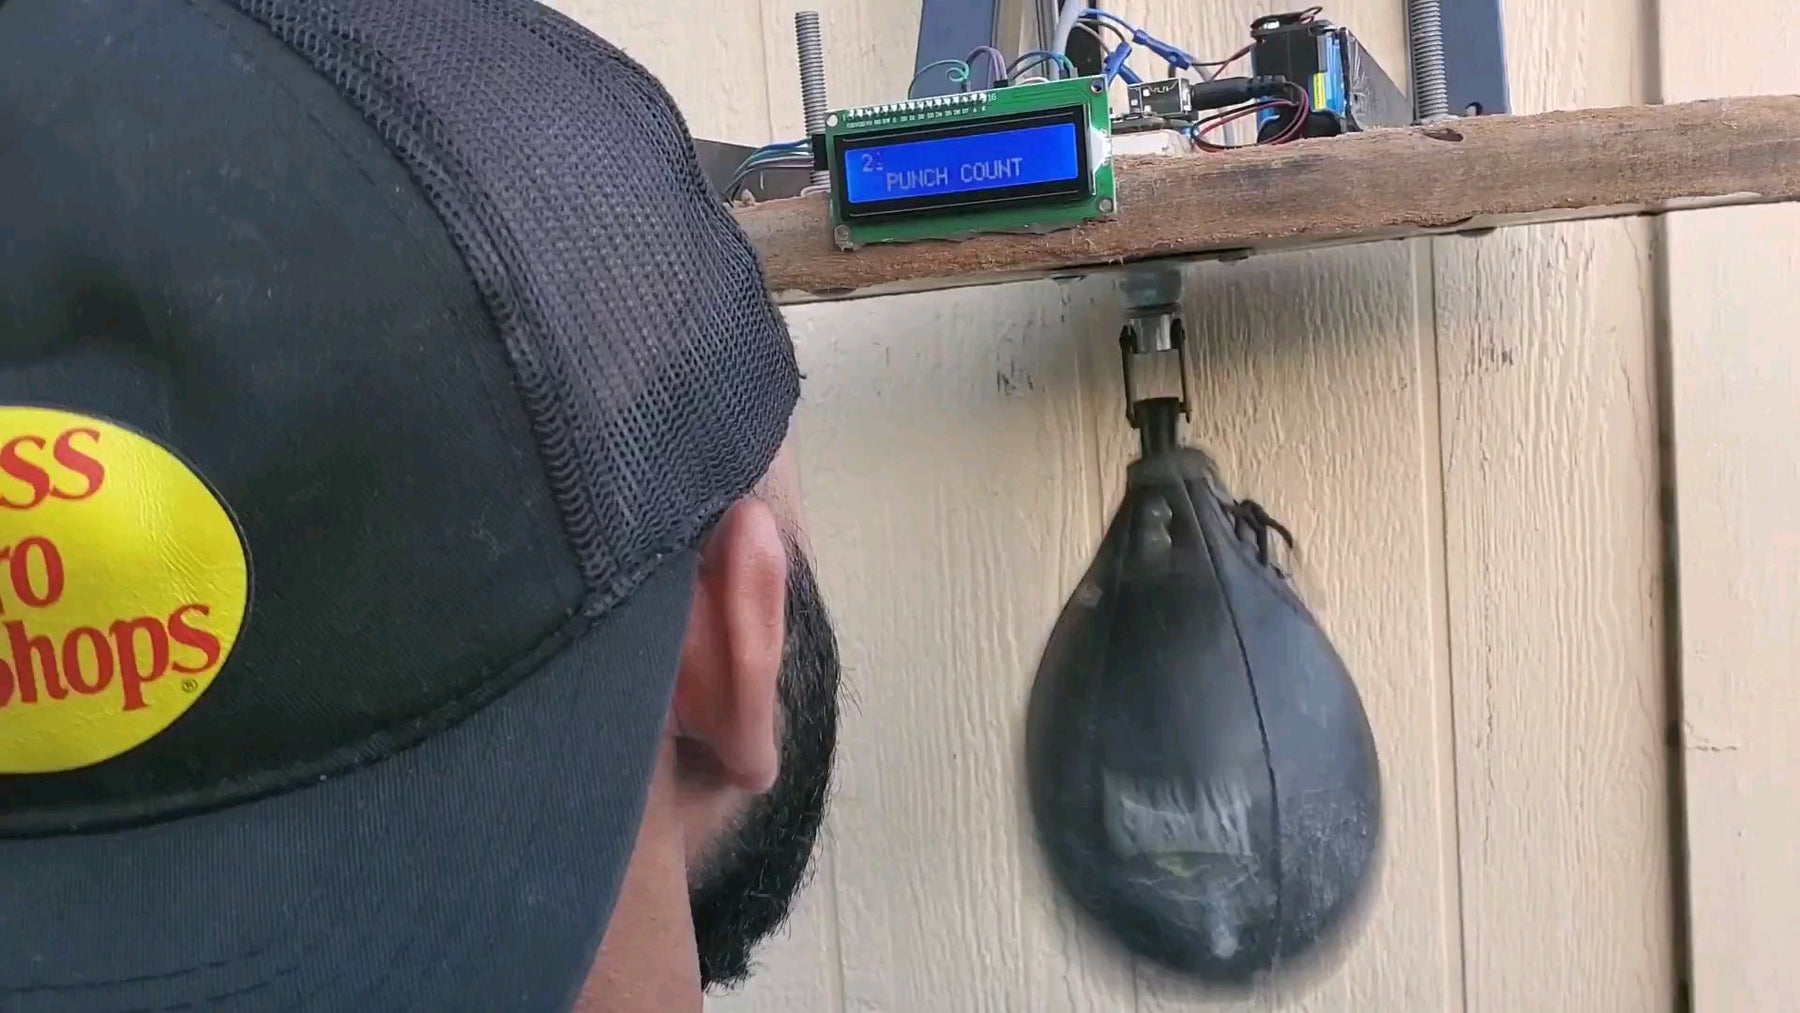 This Arduino-based speed bag counts your punches